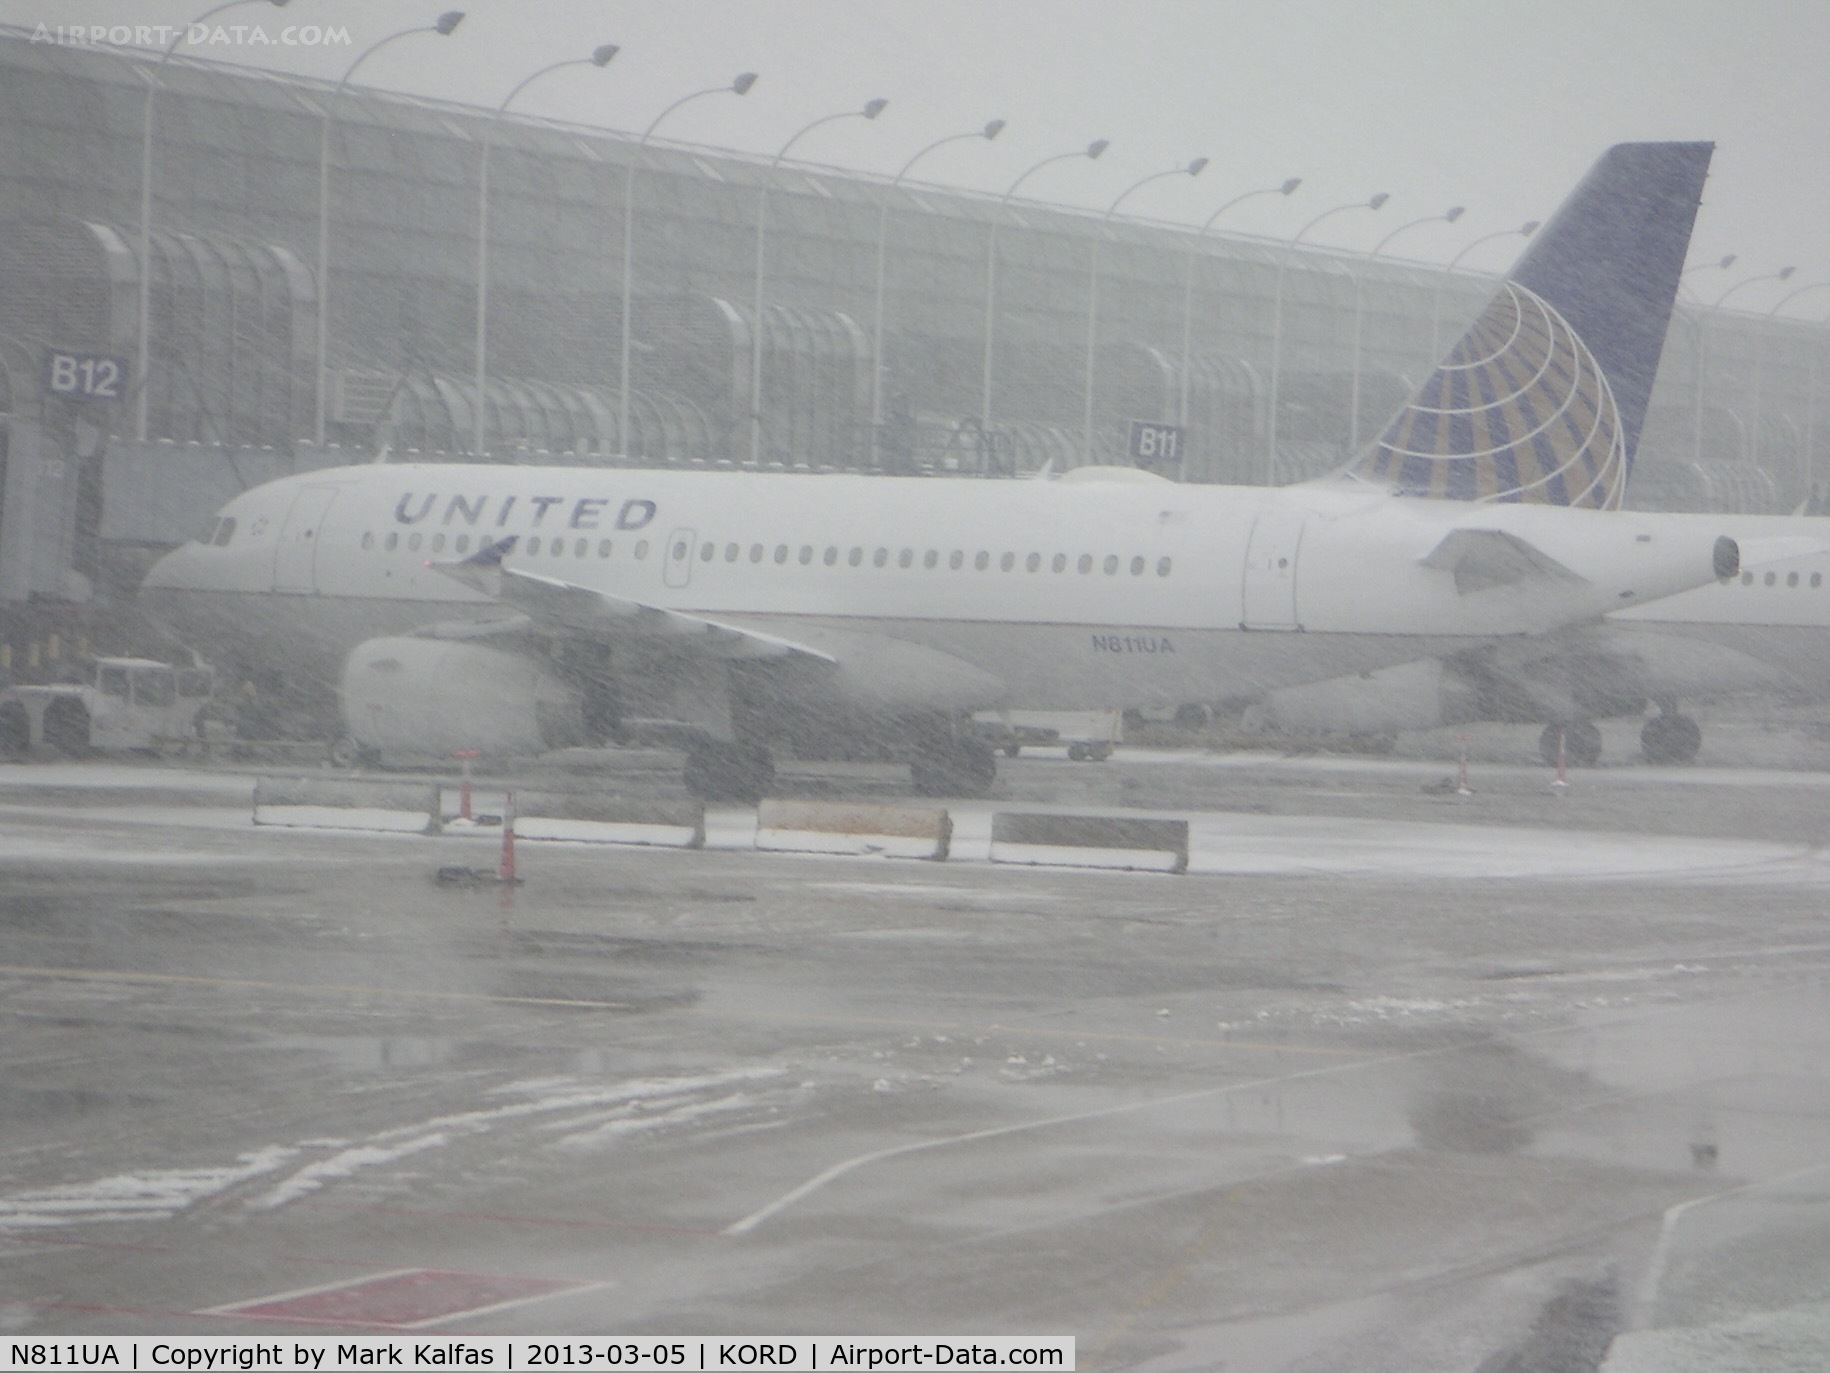 N811UA, 1998 Airbus A319-131 C/N 847, United A319,  N811UA Airbus A319-232 at gat B12 ORD during a snowstorm